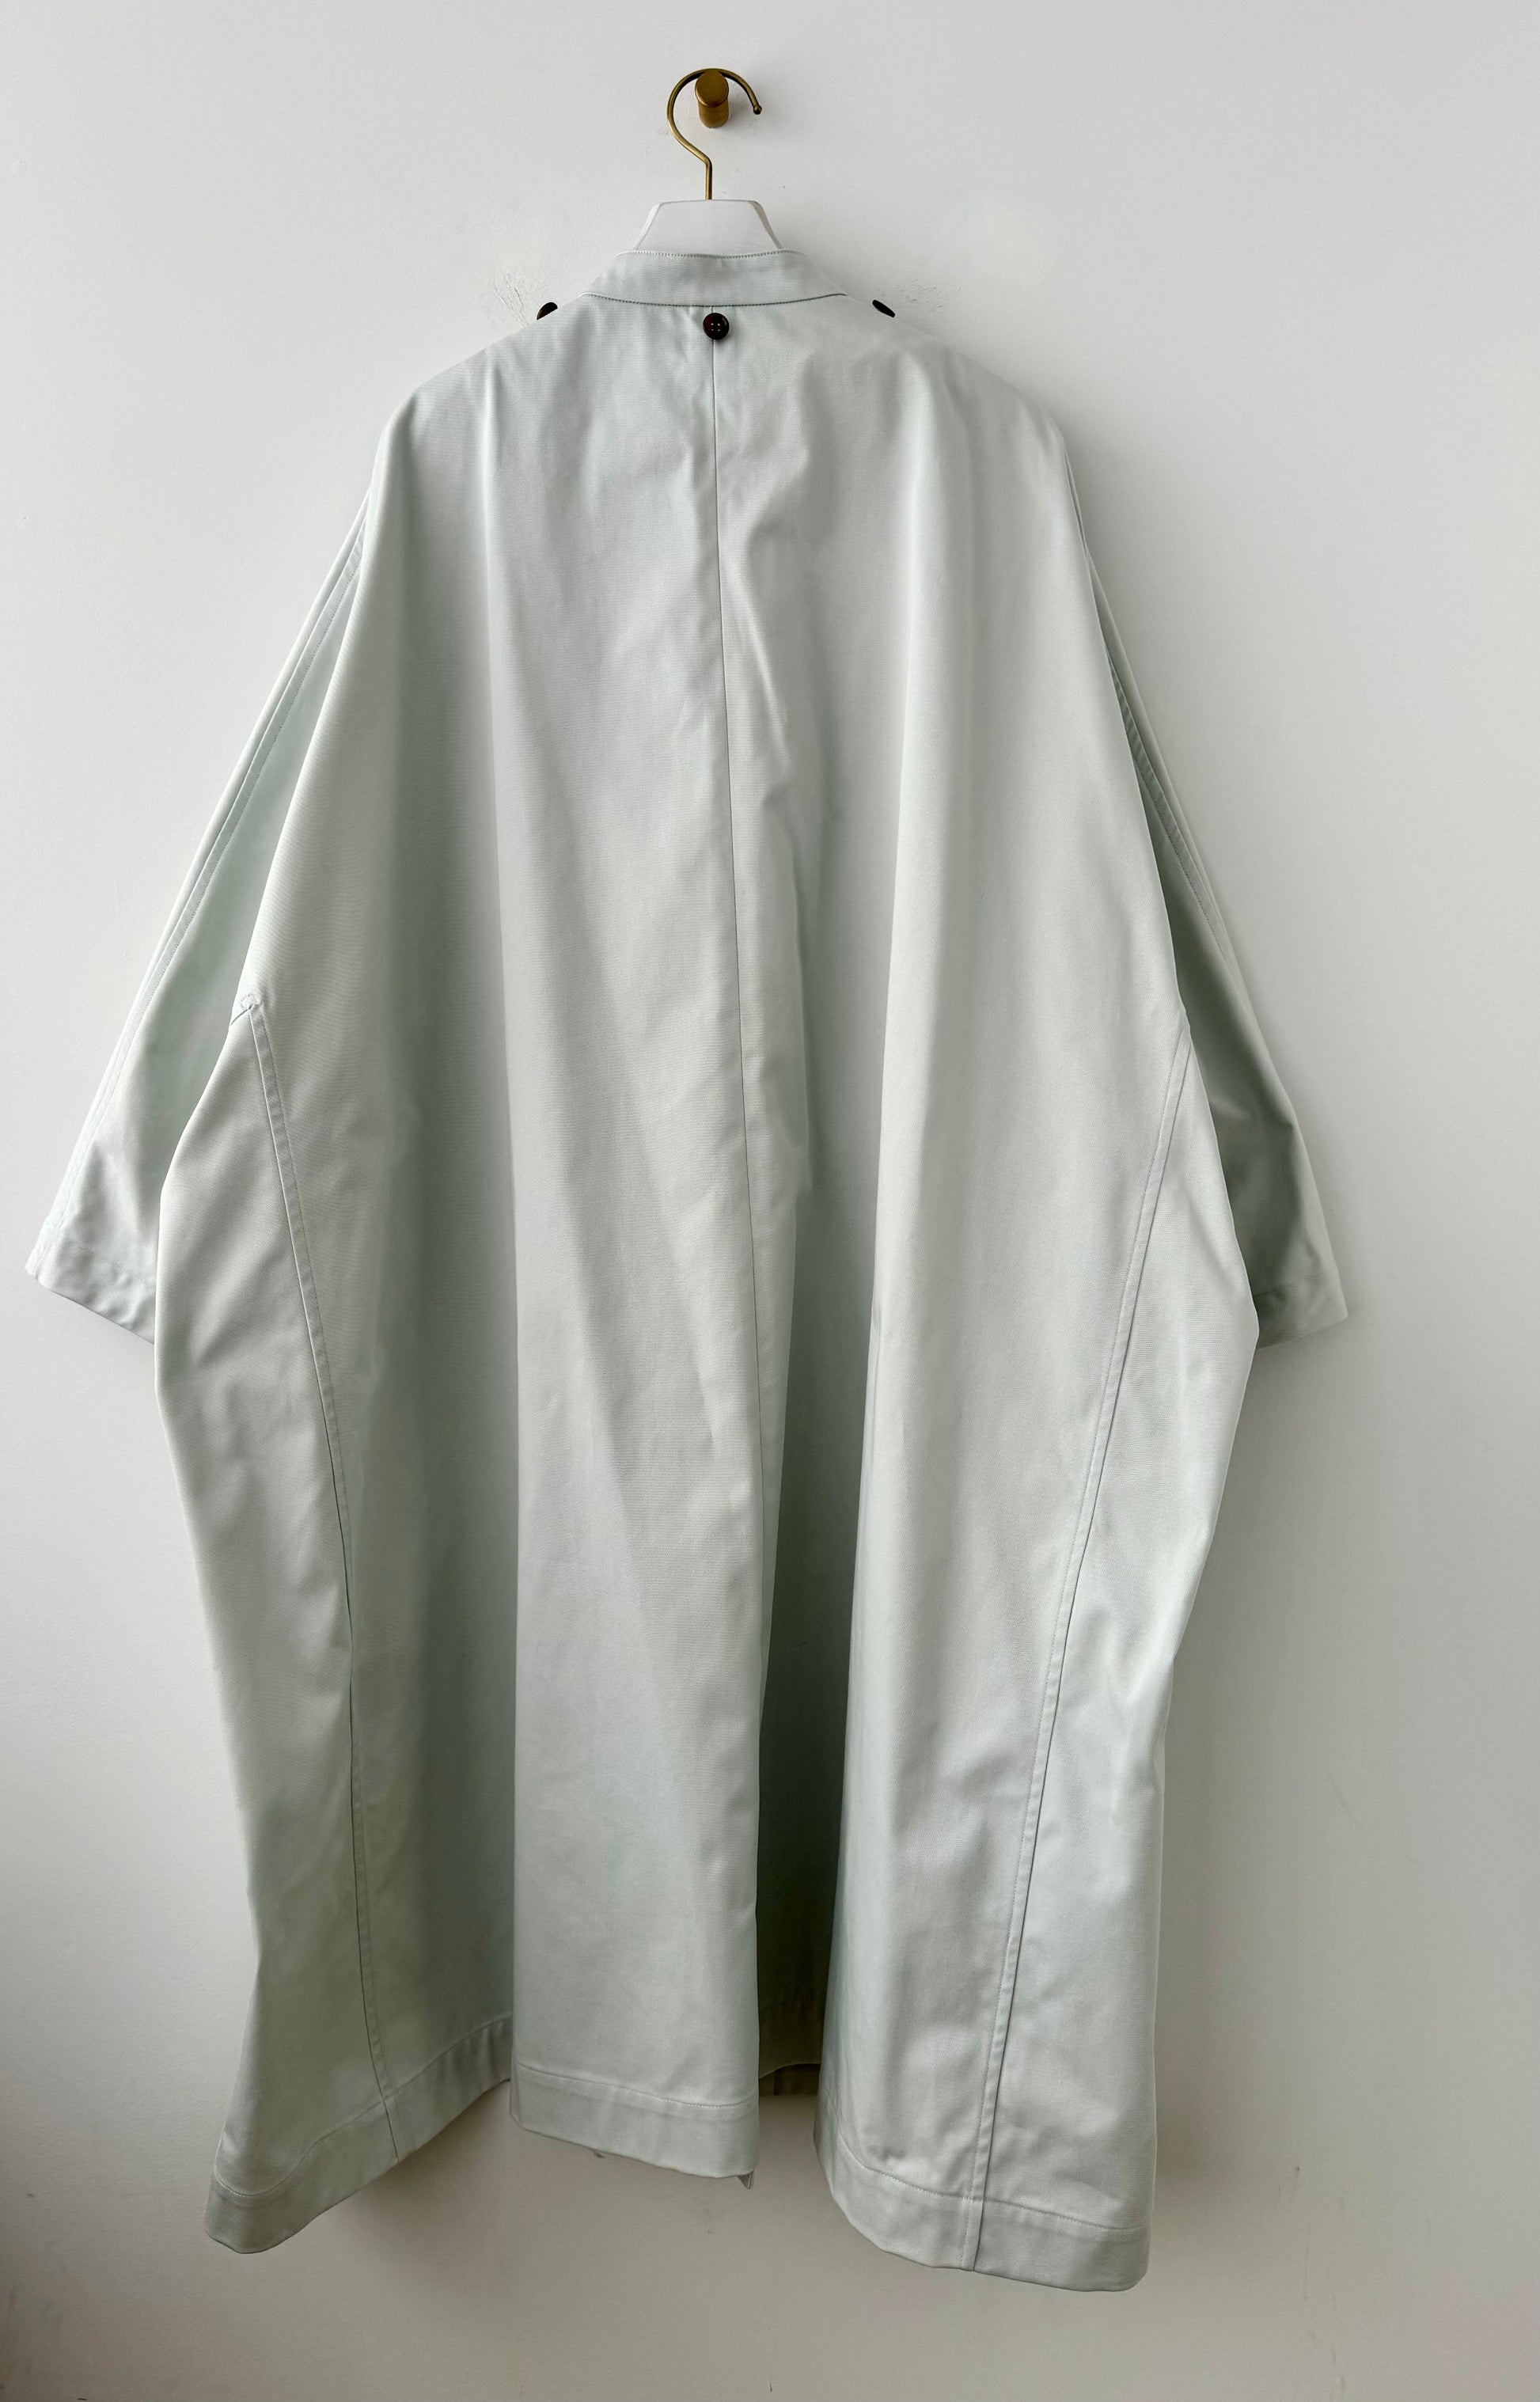 Long cape coat (Blue gray)　TENNE HANDCRAFTED MODERN コート　通販　取扱店